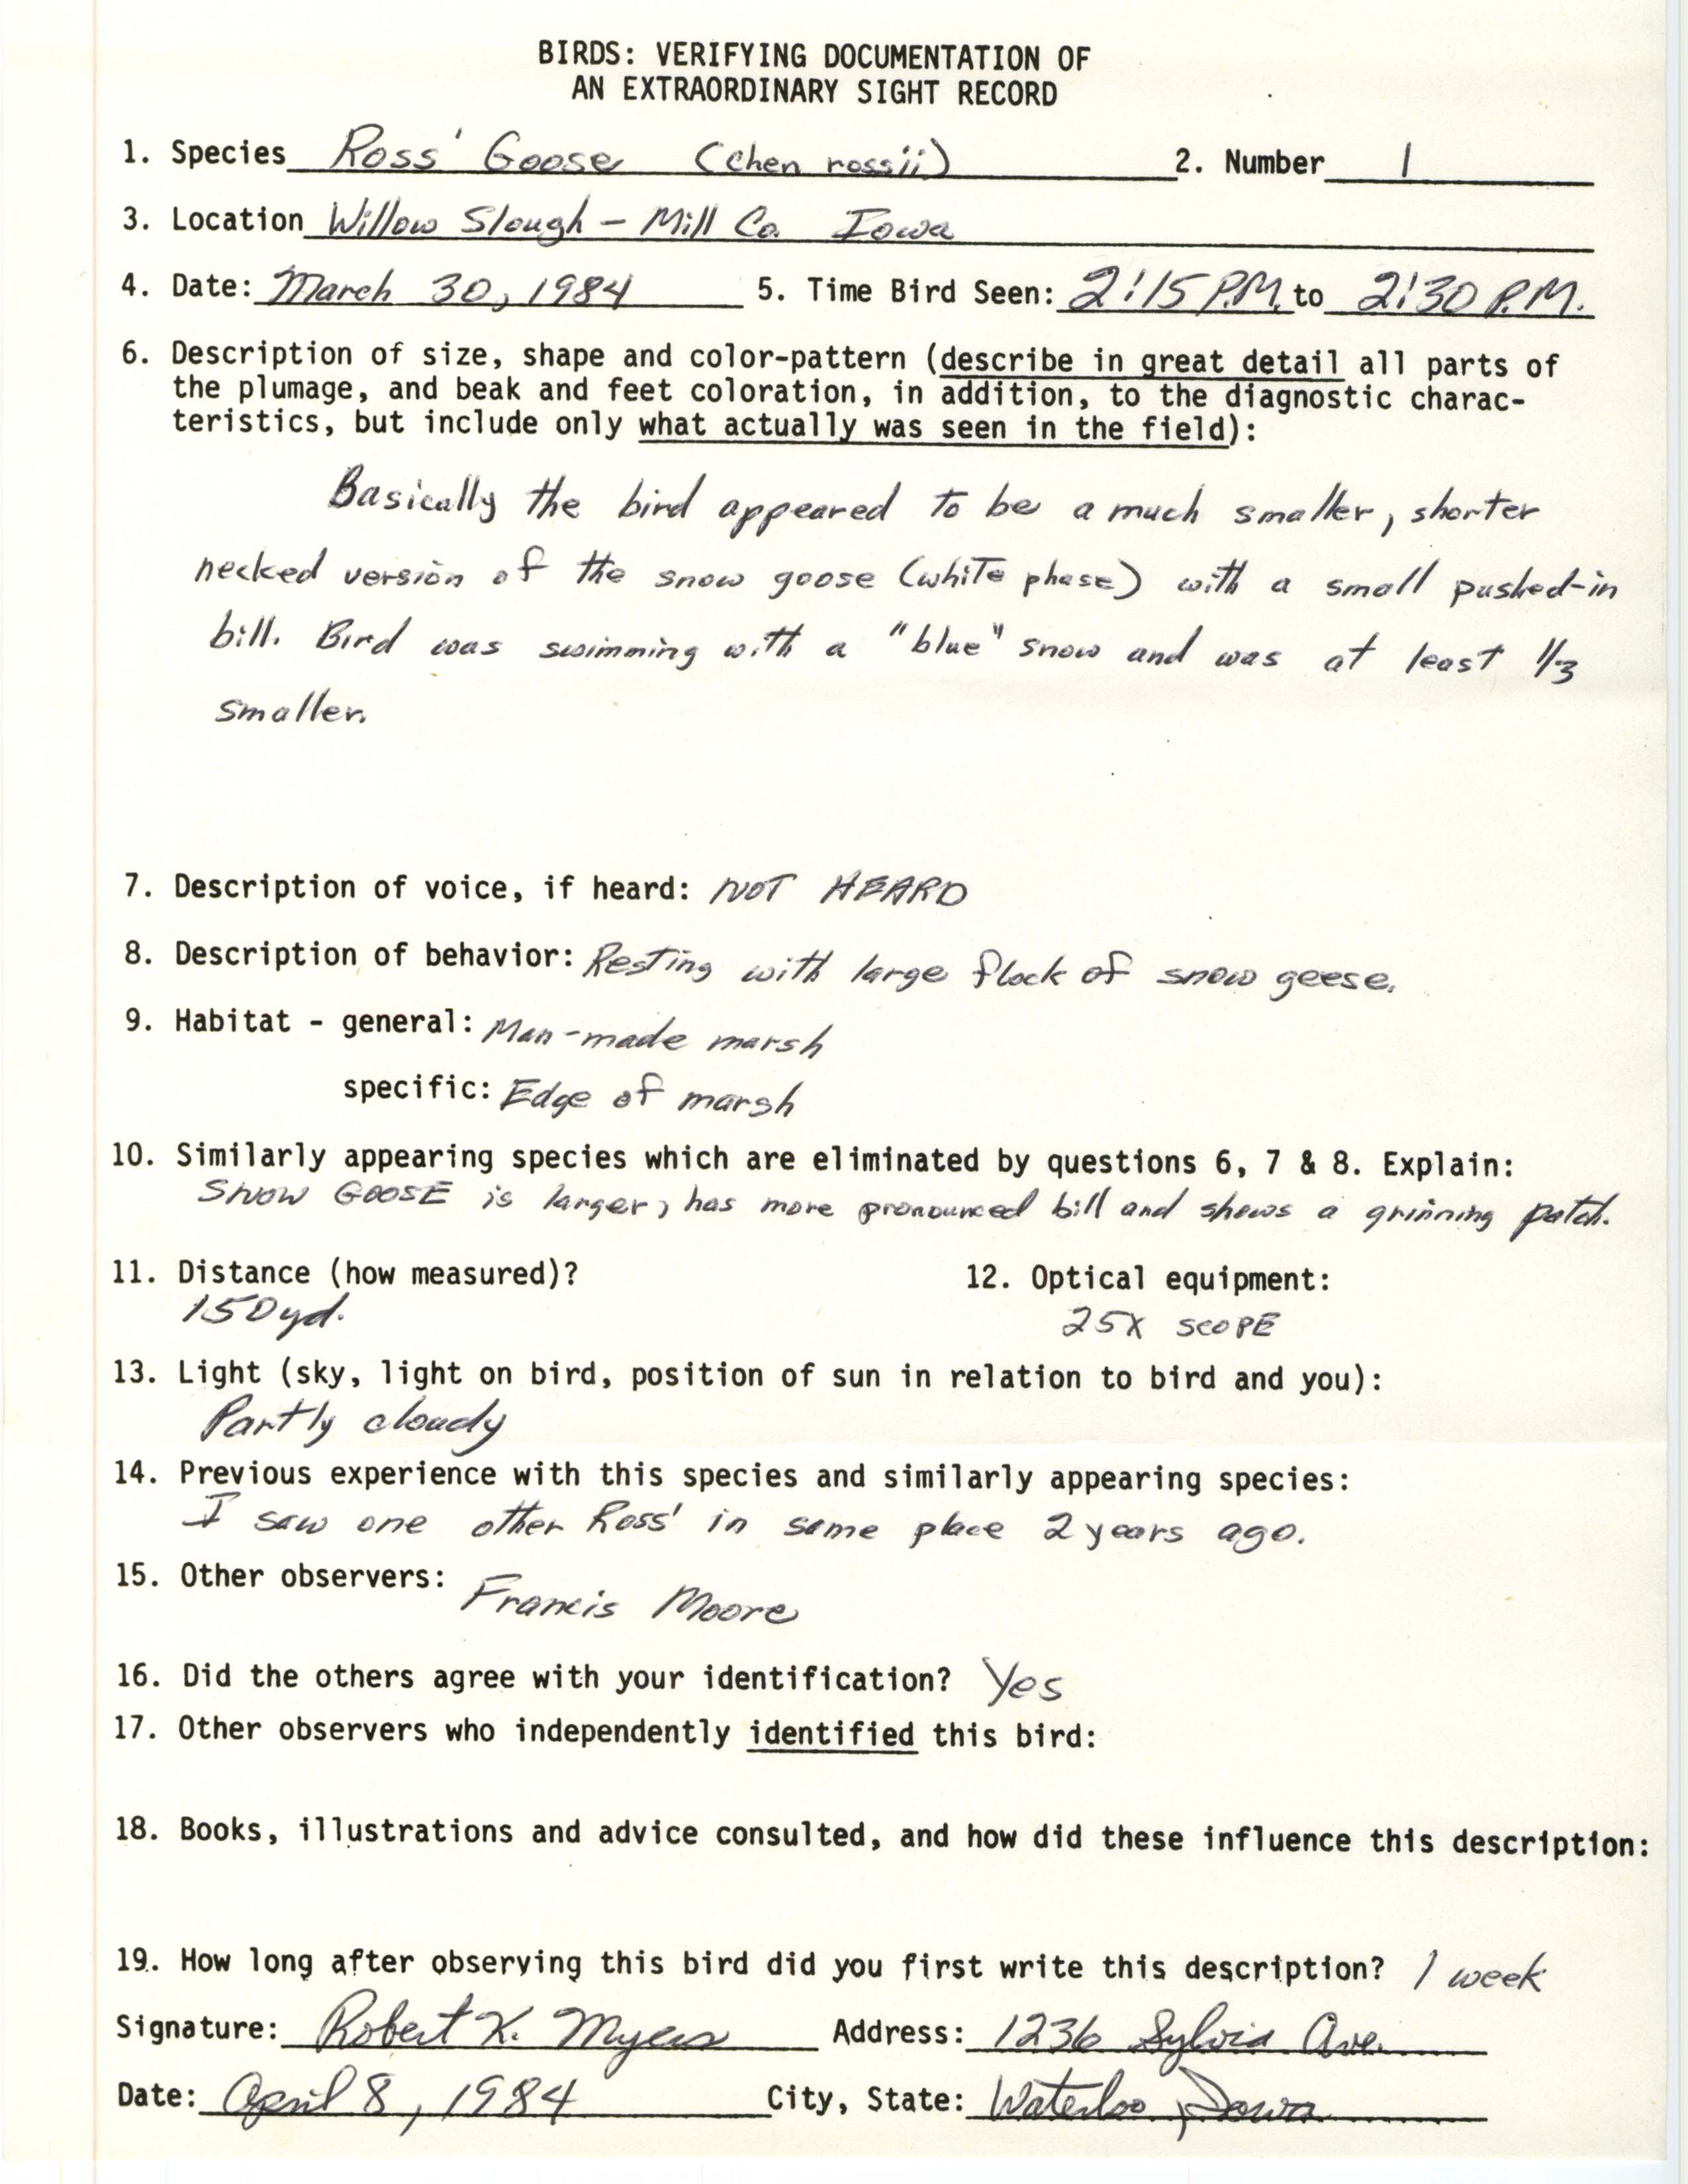 Rare bird documentation form for Ross' Goose at Willow Slough, 1984